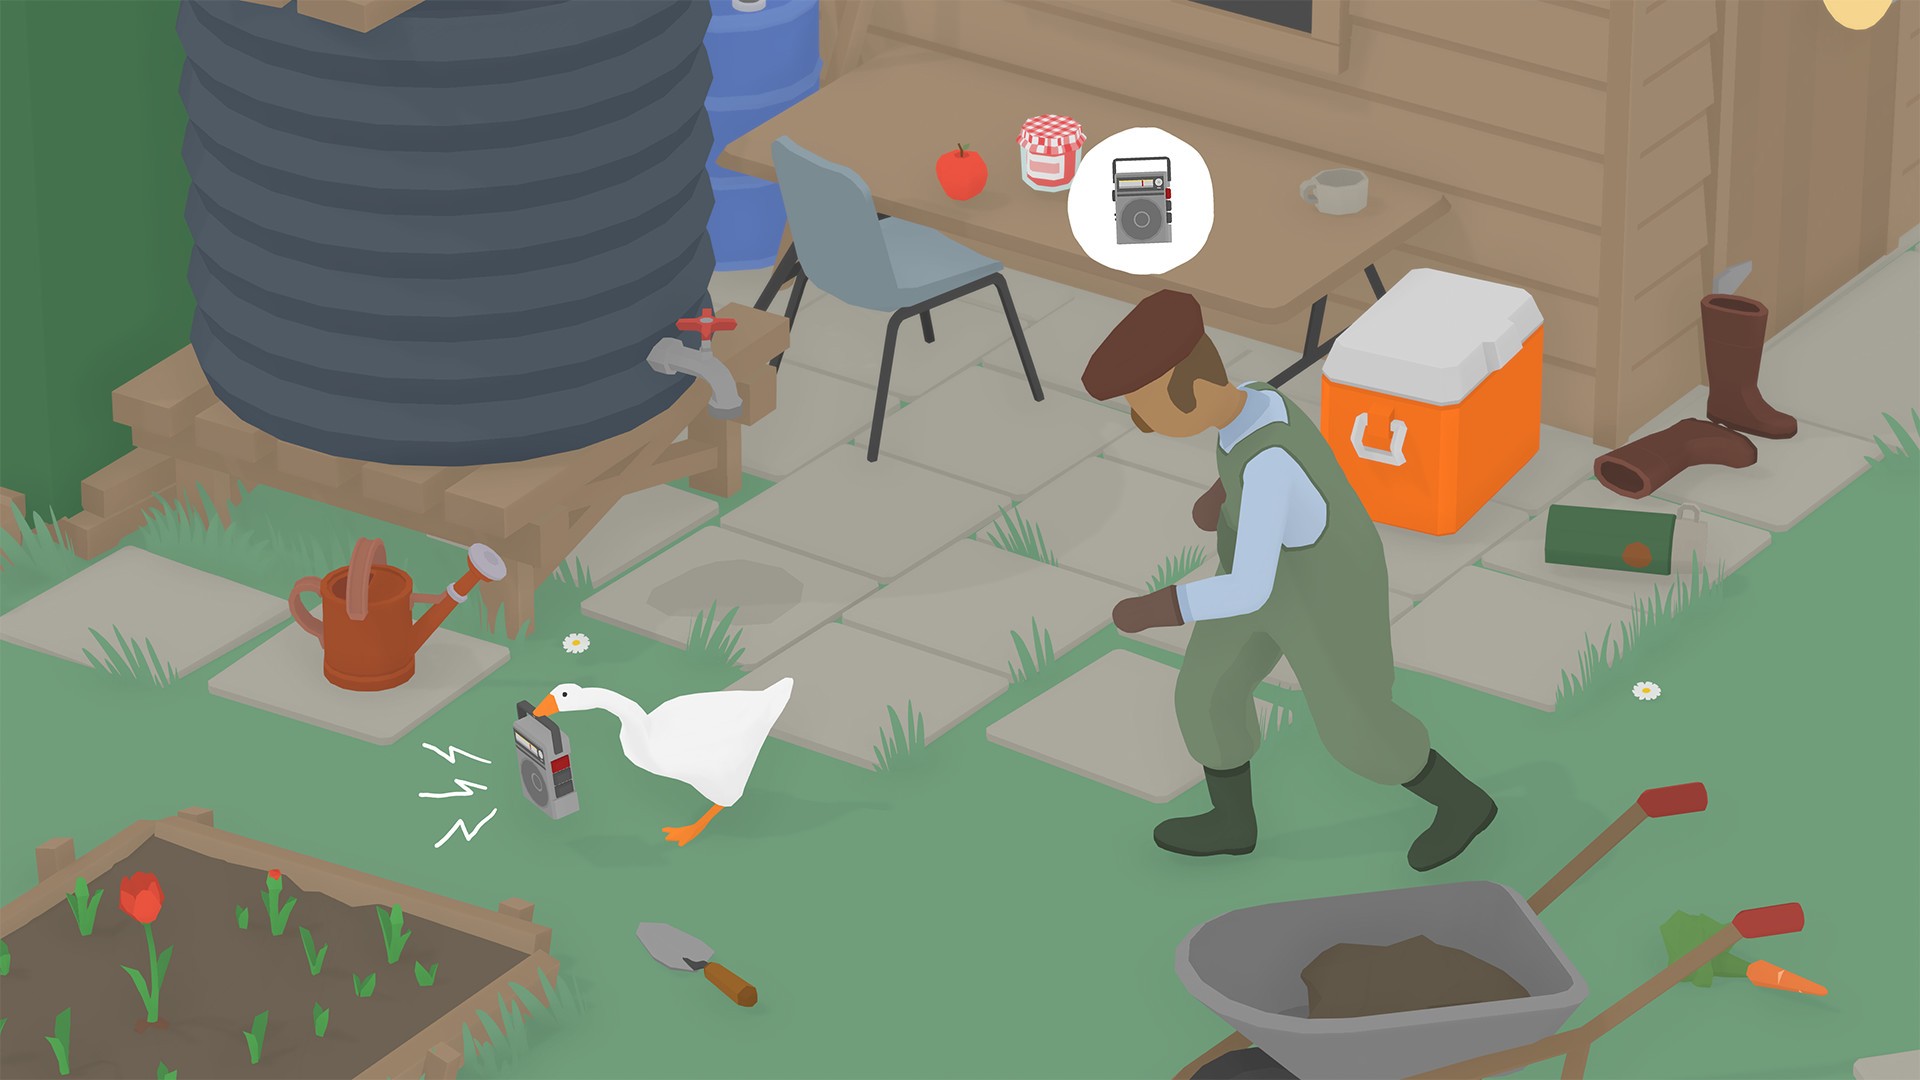 Best games for laptop: Untitled Goose Game. Image shows a man chasing a goose who has stolen his speaker.